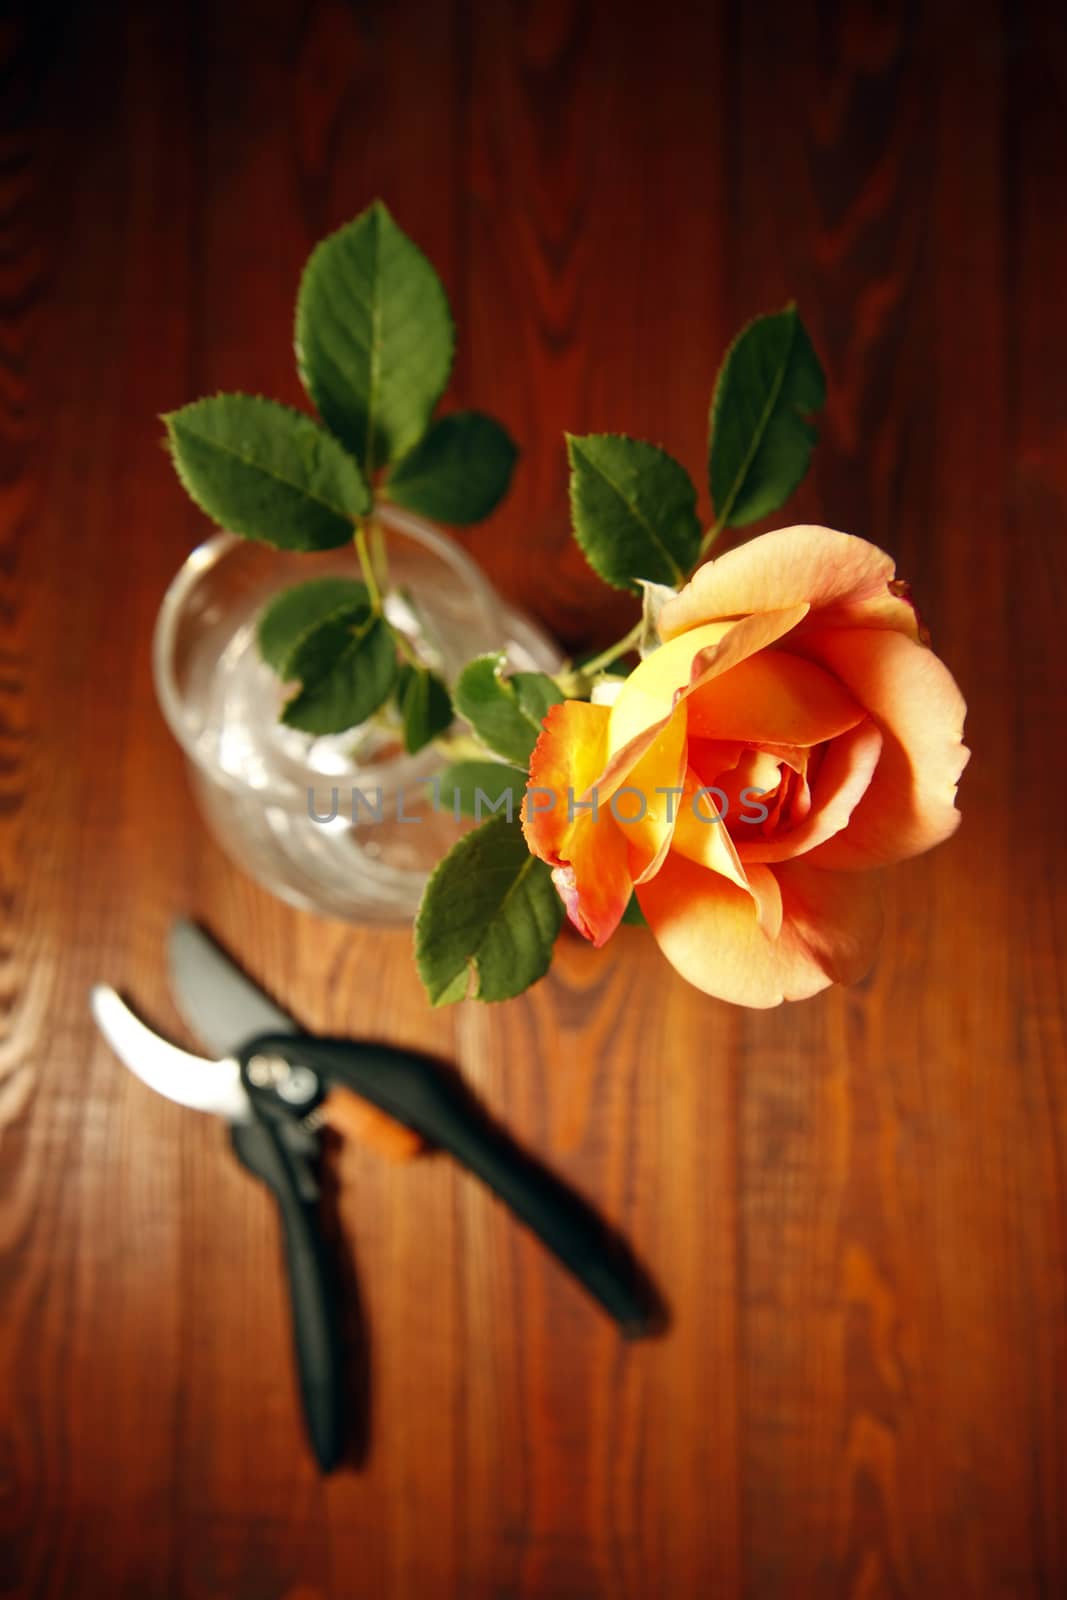 Beautiful rose and scissors  by friday